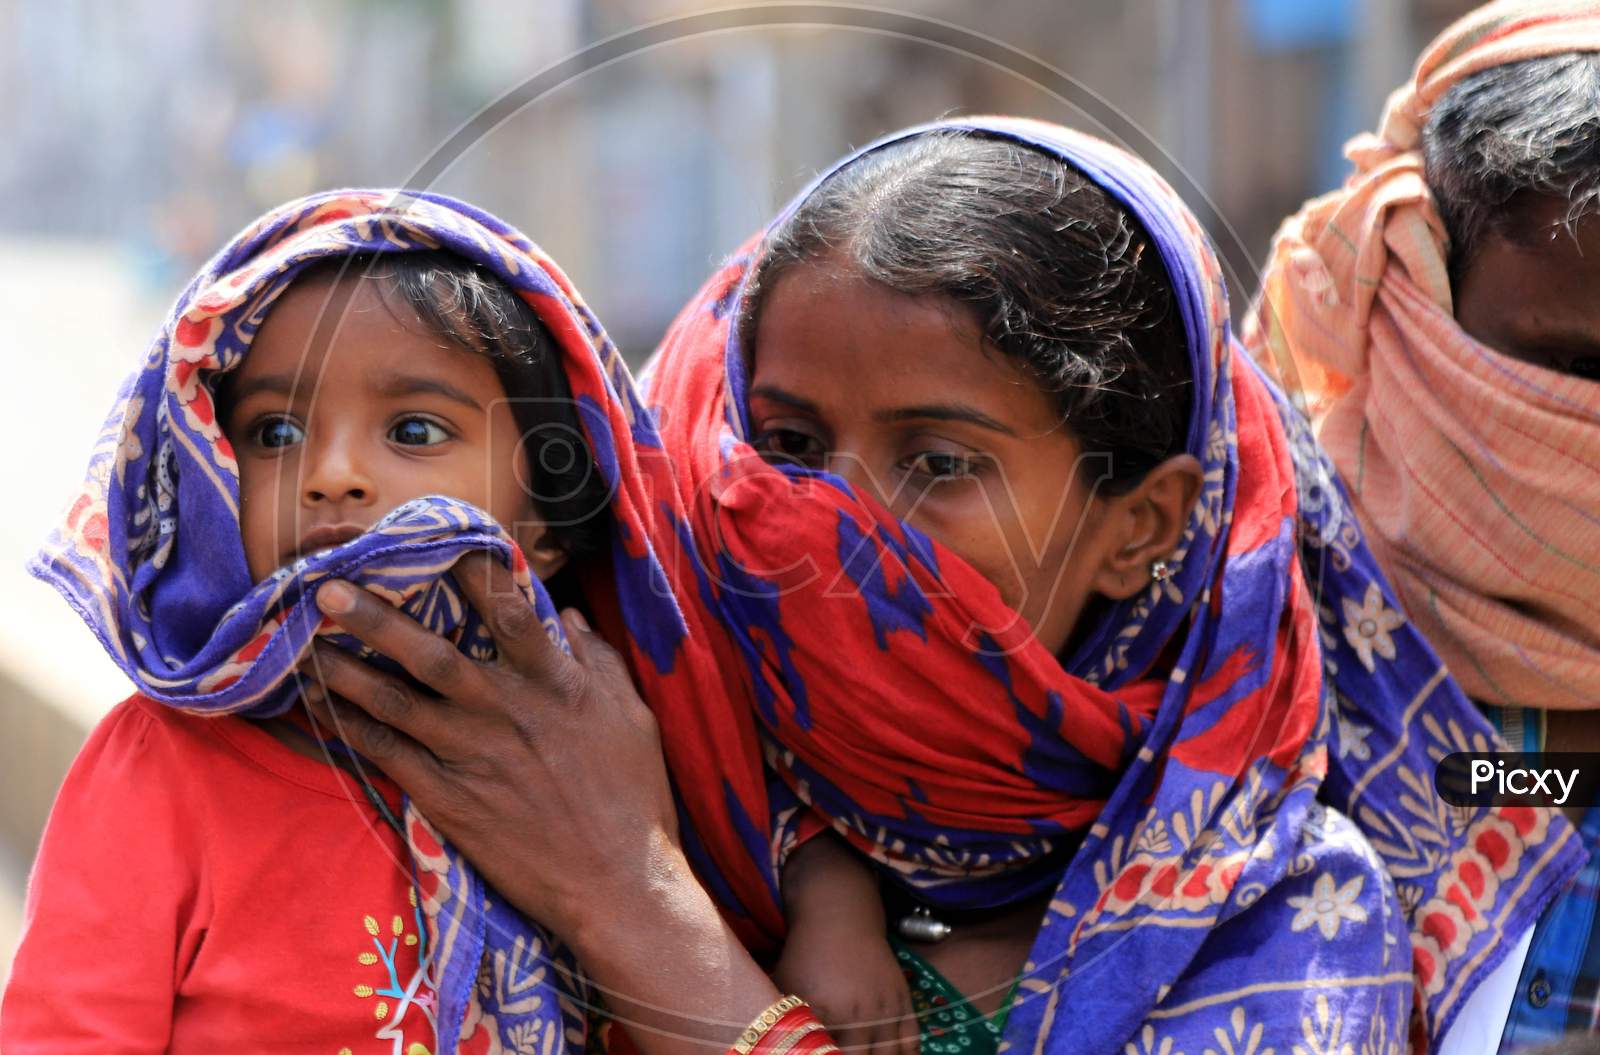 A Mother Covering Her Child Face With Veil during Nationwide Lockdown Amidst Coronavirus or COVID-19 Outbreak In Prayagraj